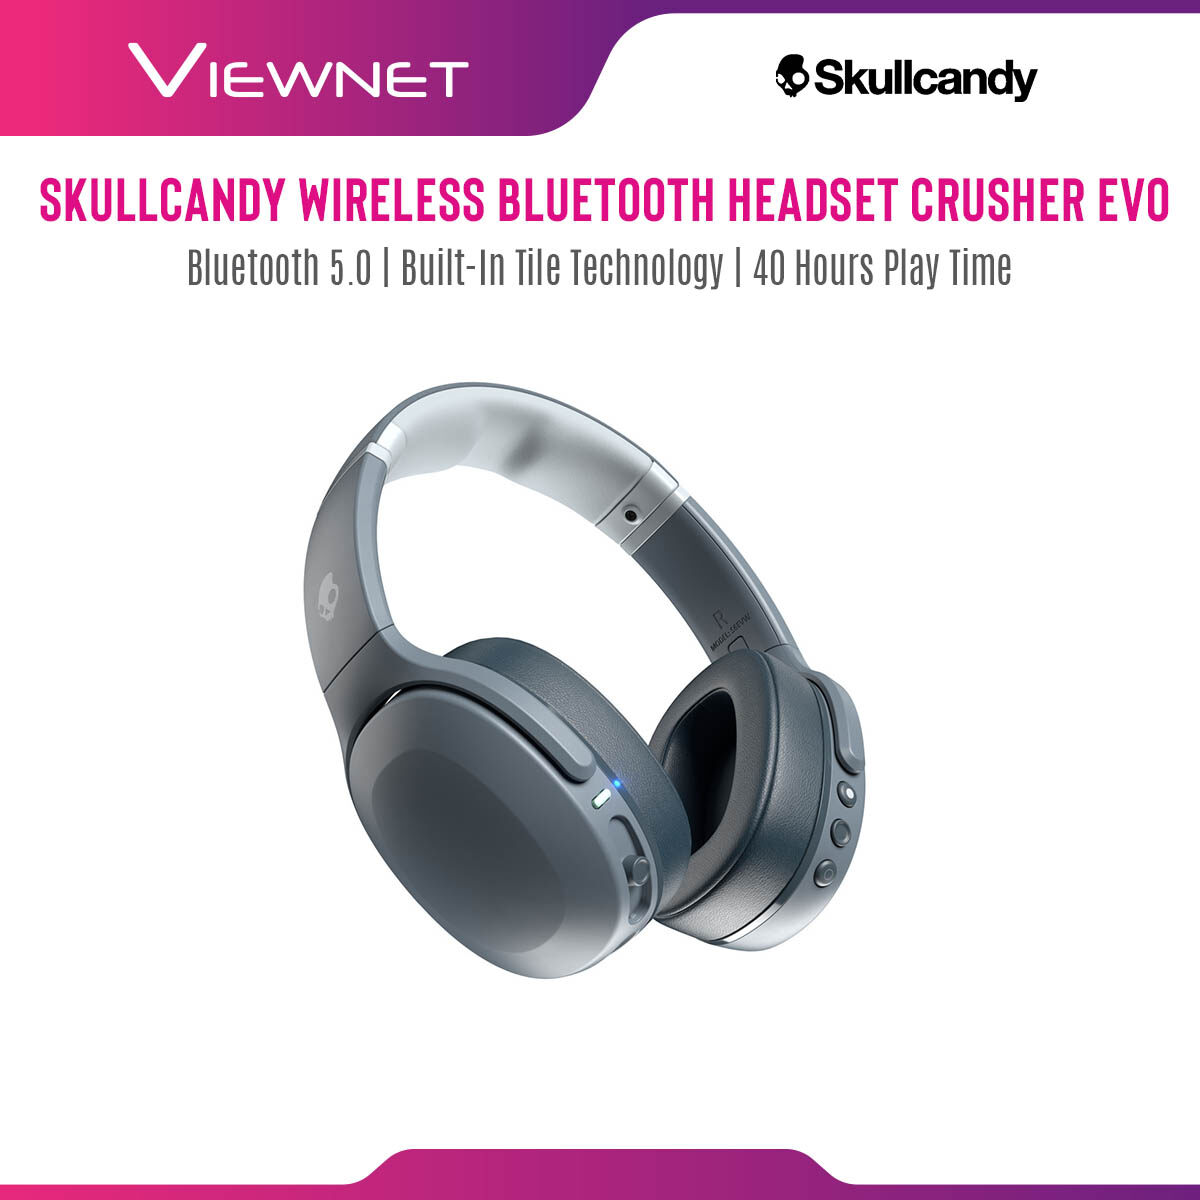 Skullcandy Crusher Evo Sensory Bass Headphones with Personal 40 Hours of Battery + Rapid Charge